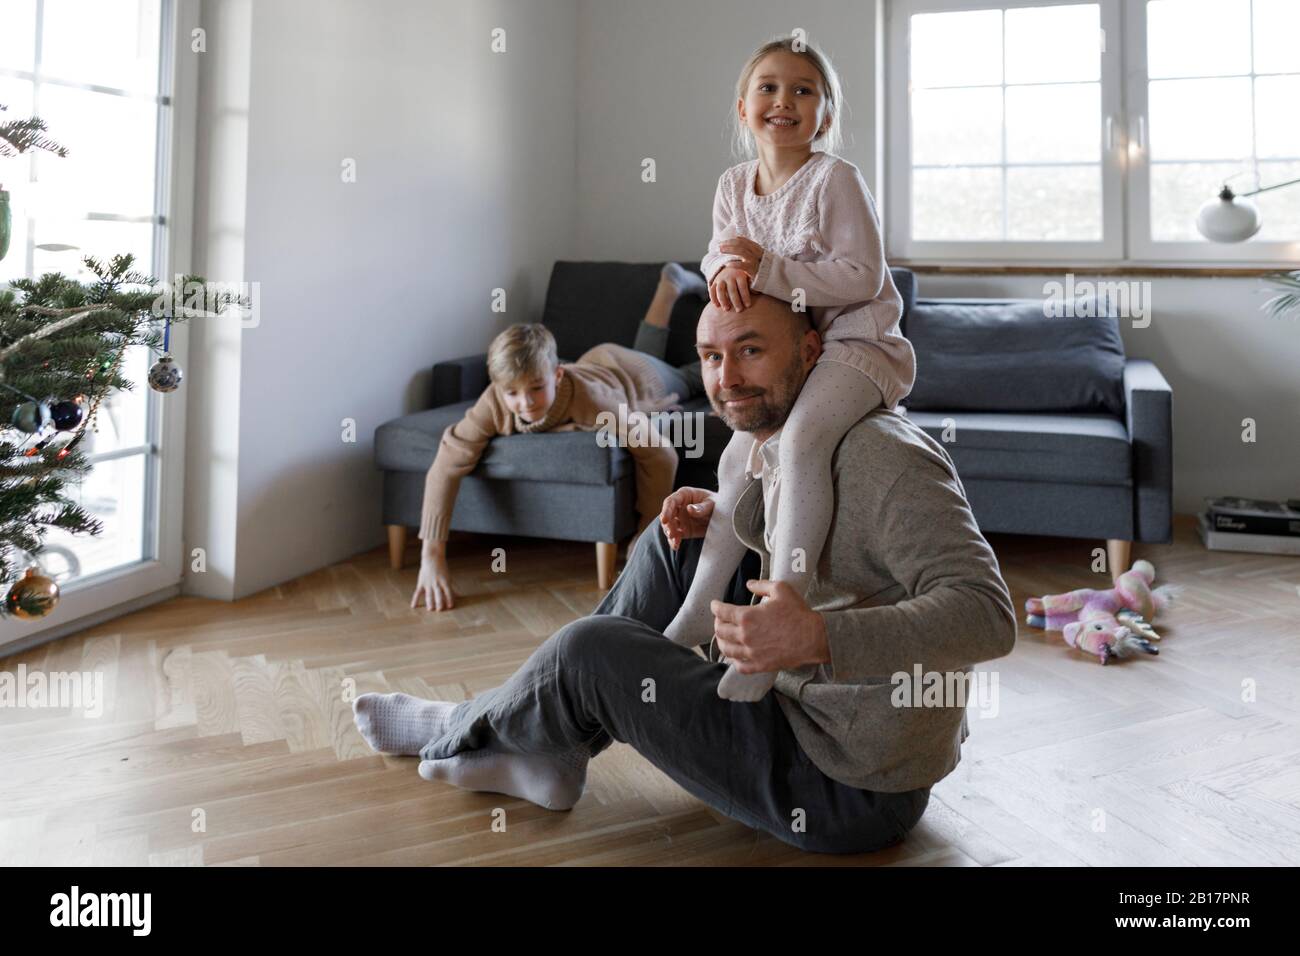 Portrait of mature man sitting on the floor at home playing with his little daughter Stock Photo